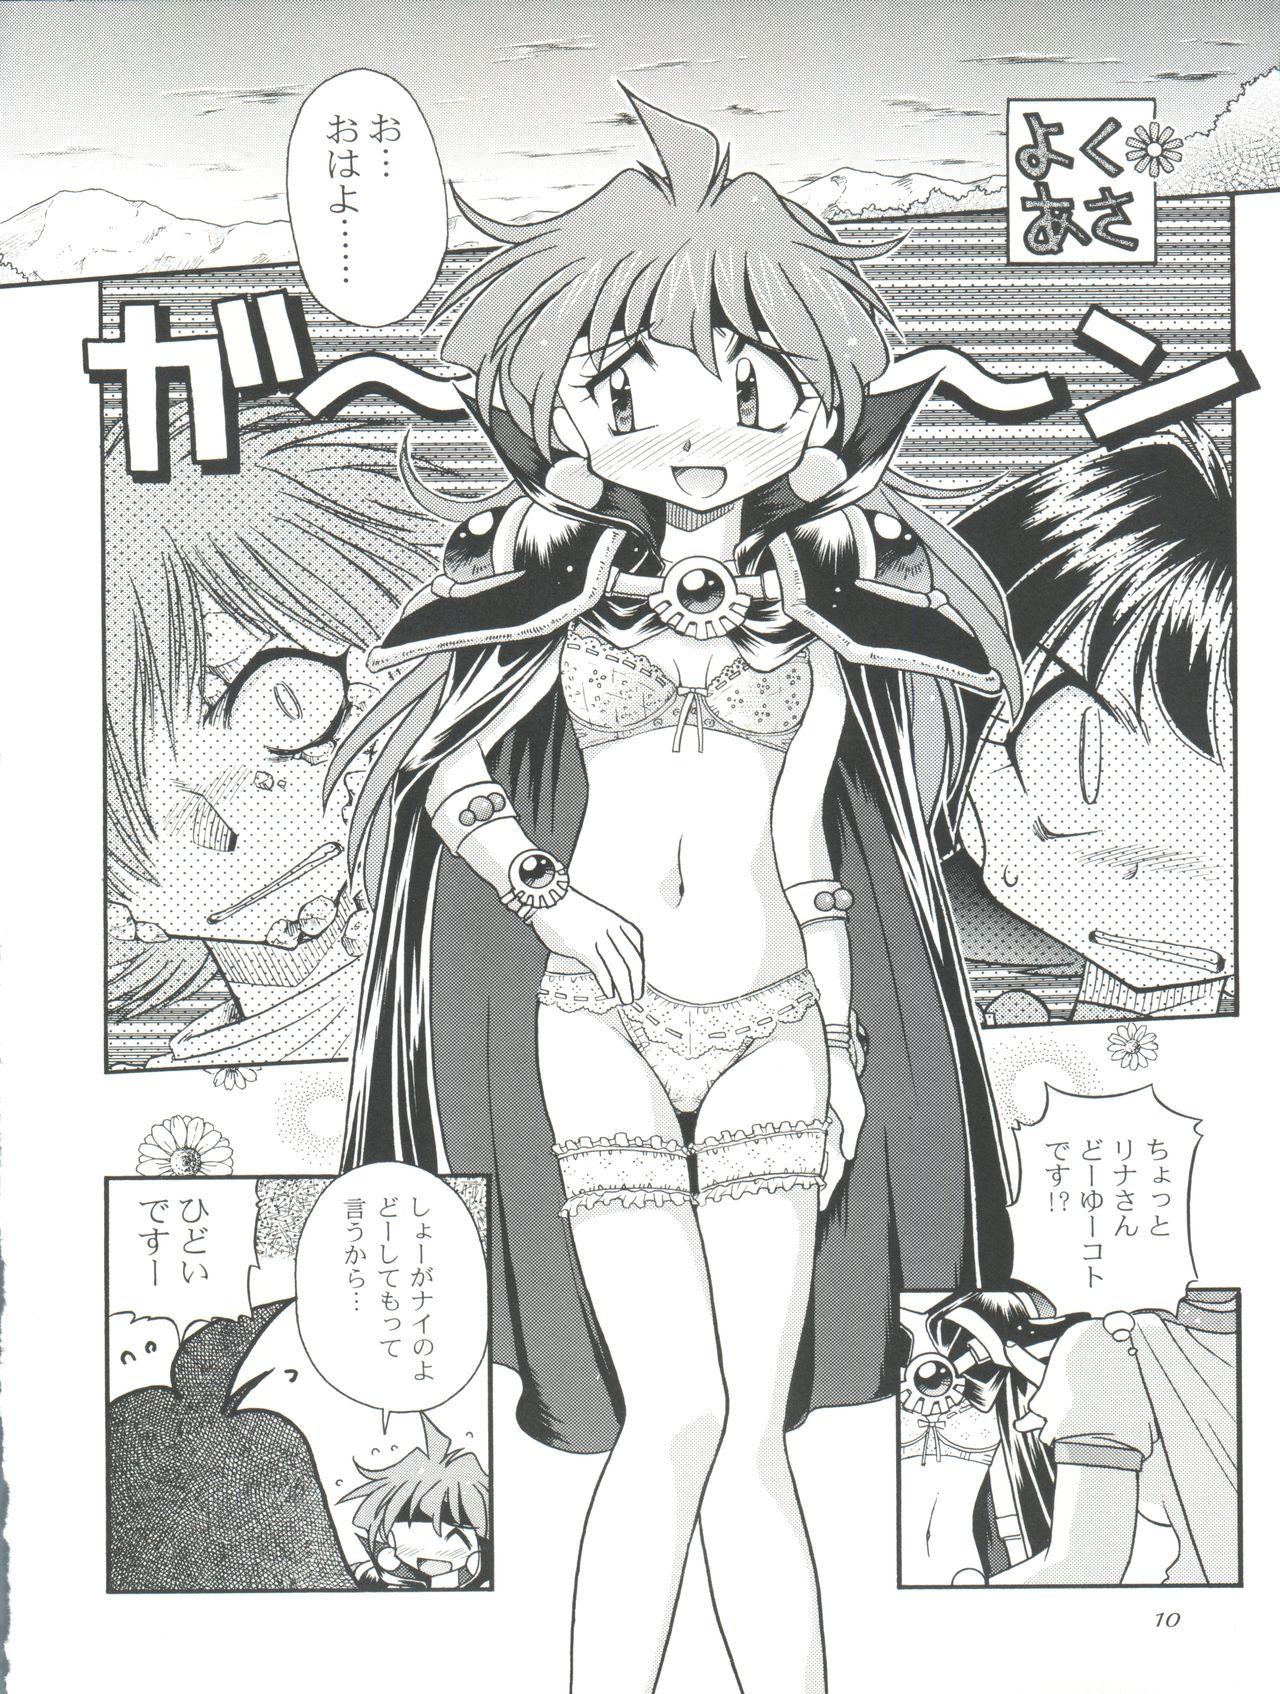 Trimmed Slayers Tiny - Slayers Anal Play - Page 10